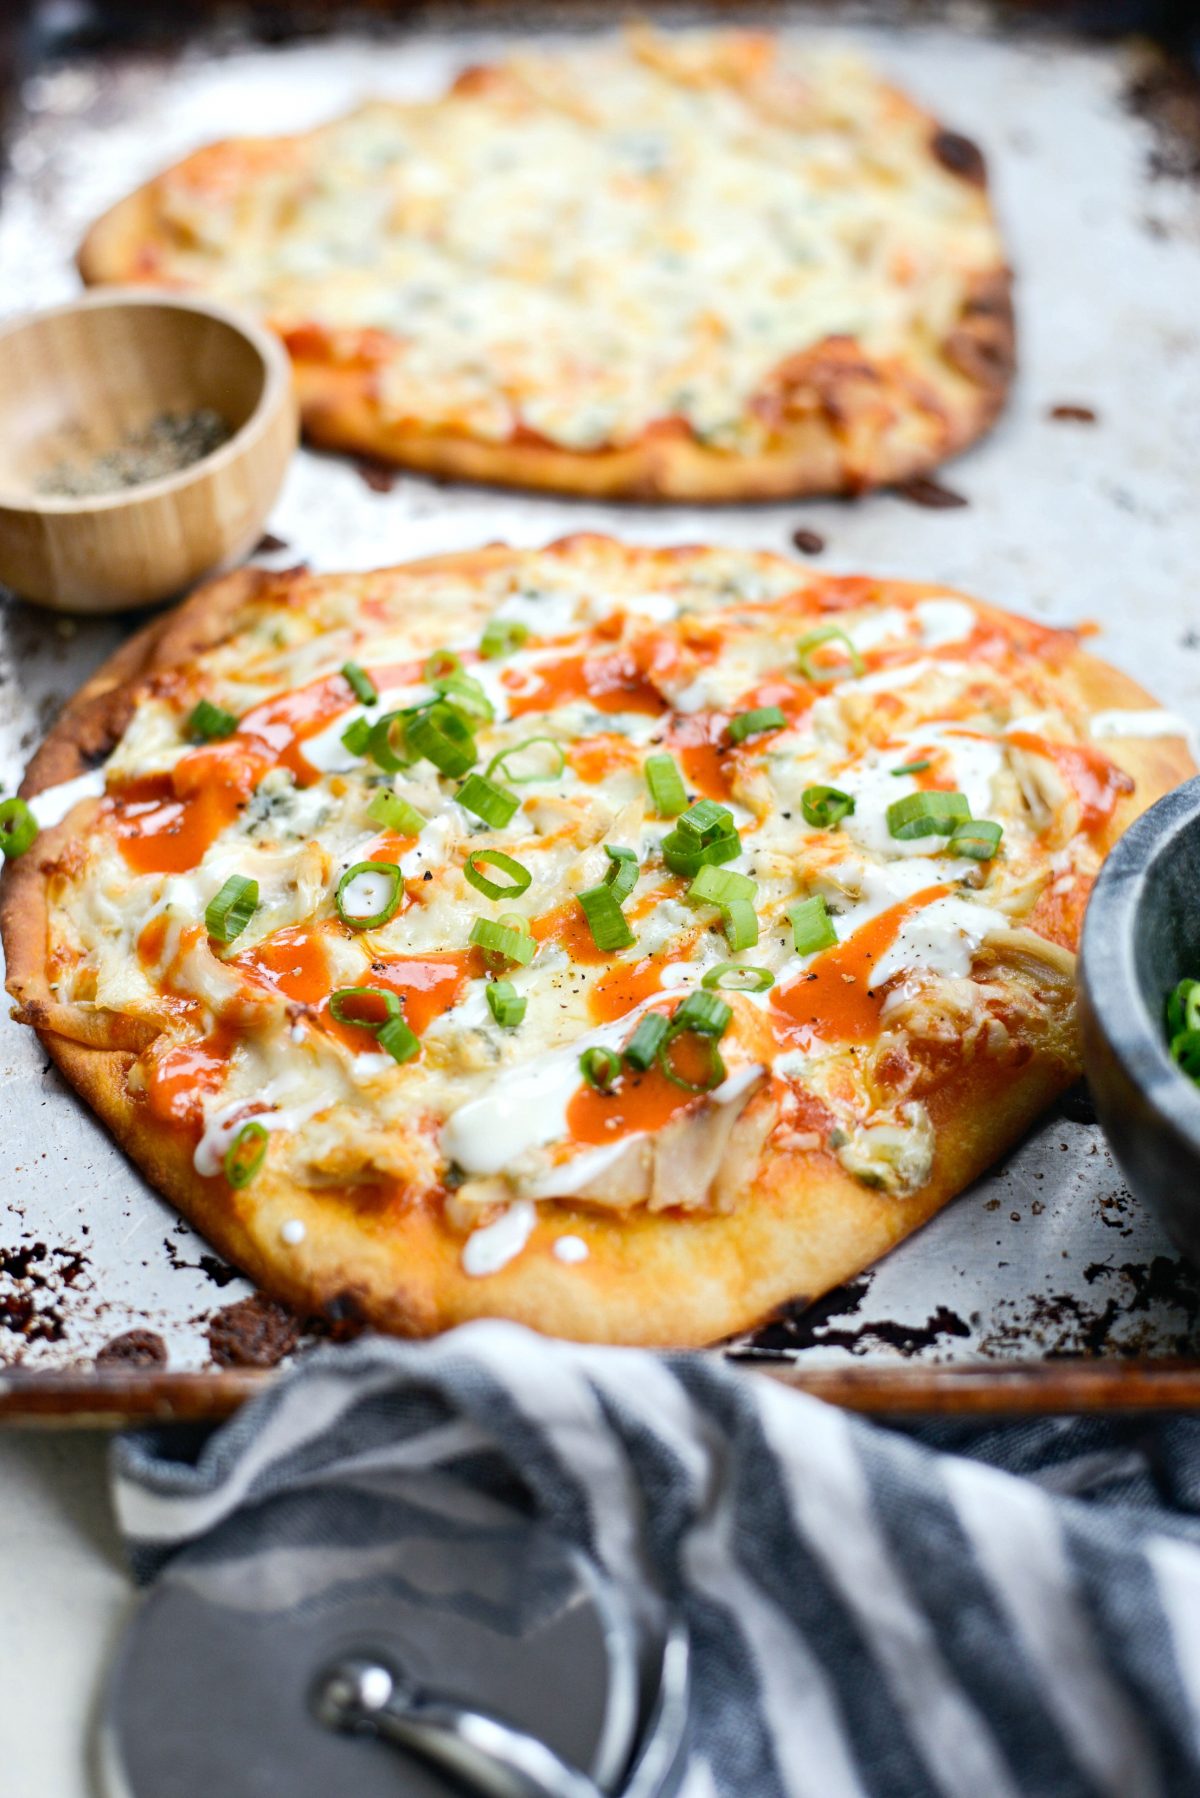 Buffalo Chicken Flatbread Pizzas with green onions